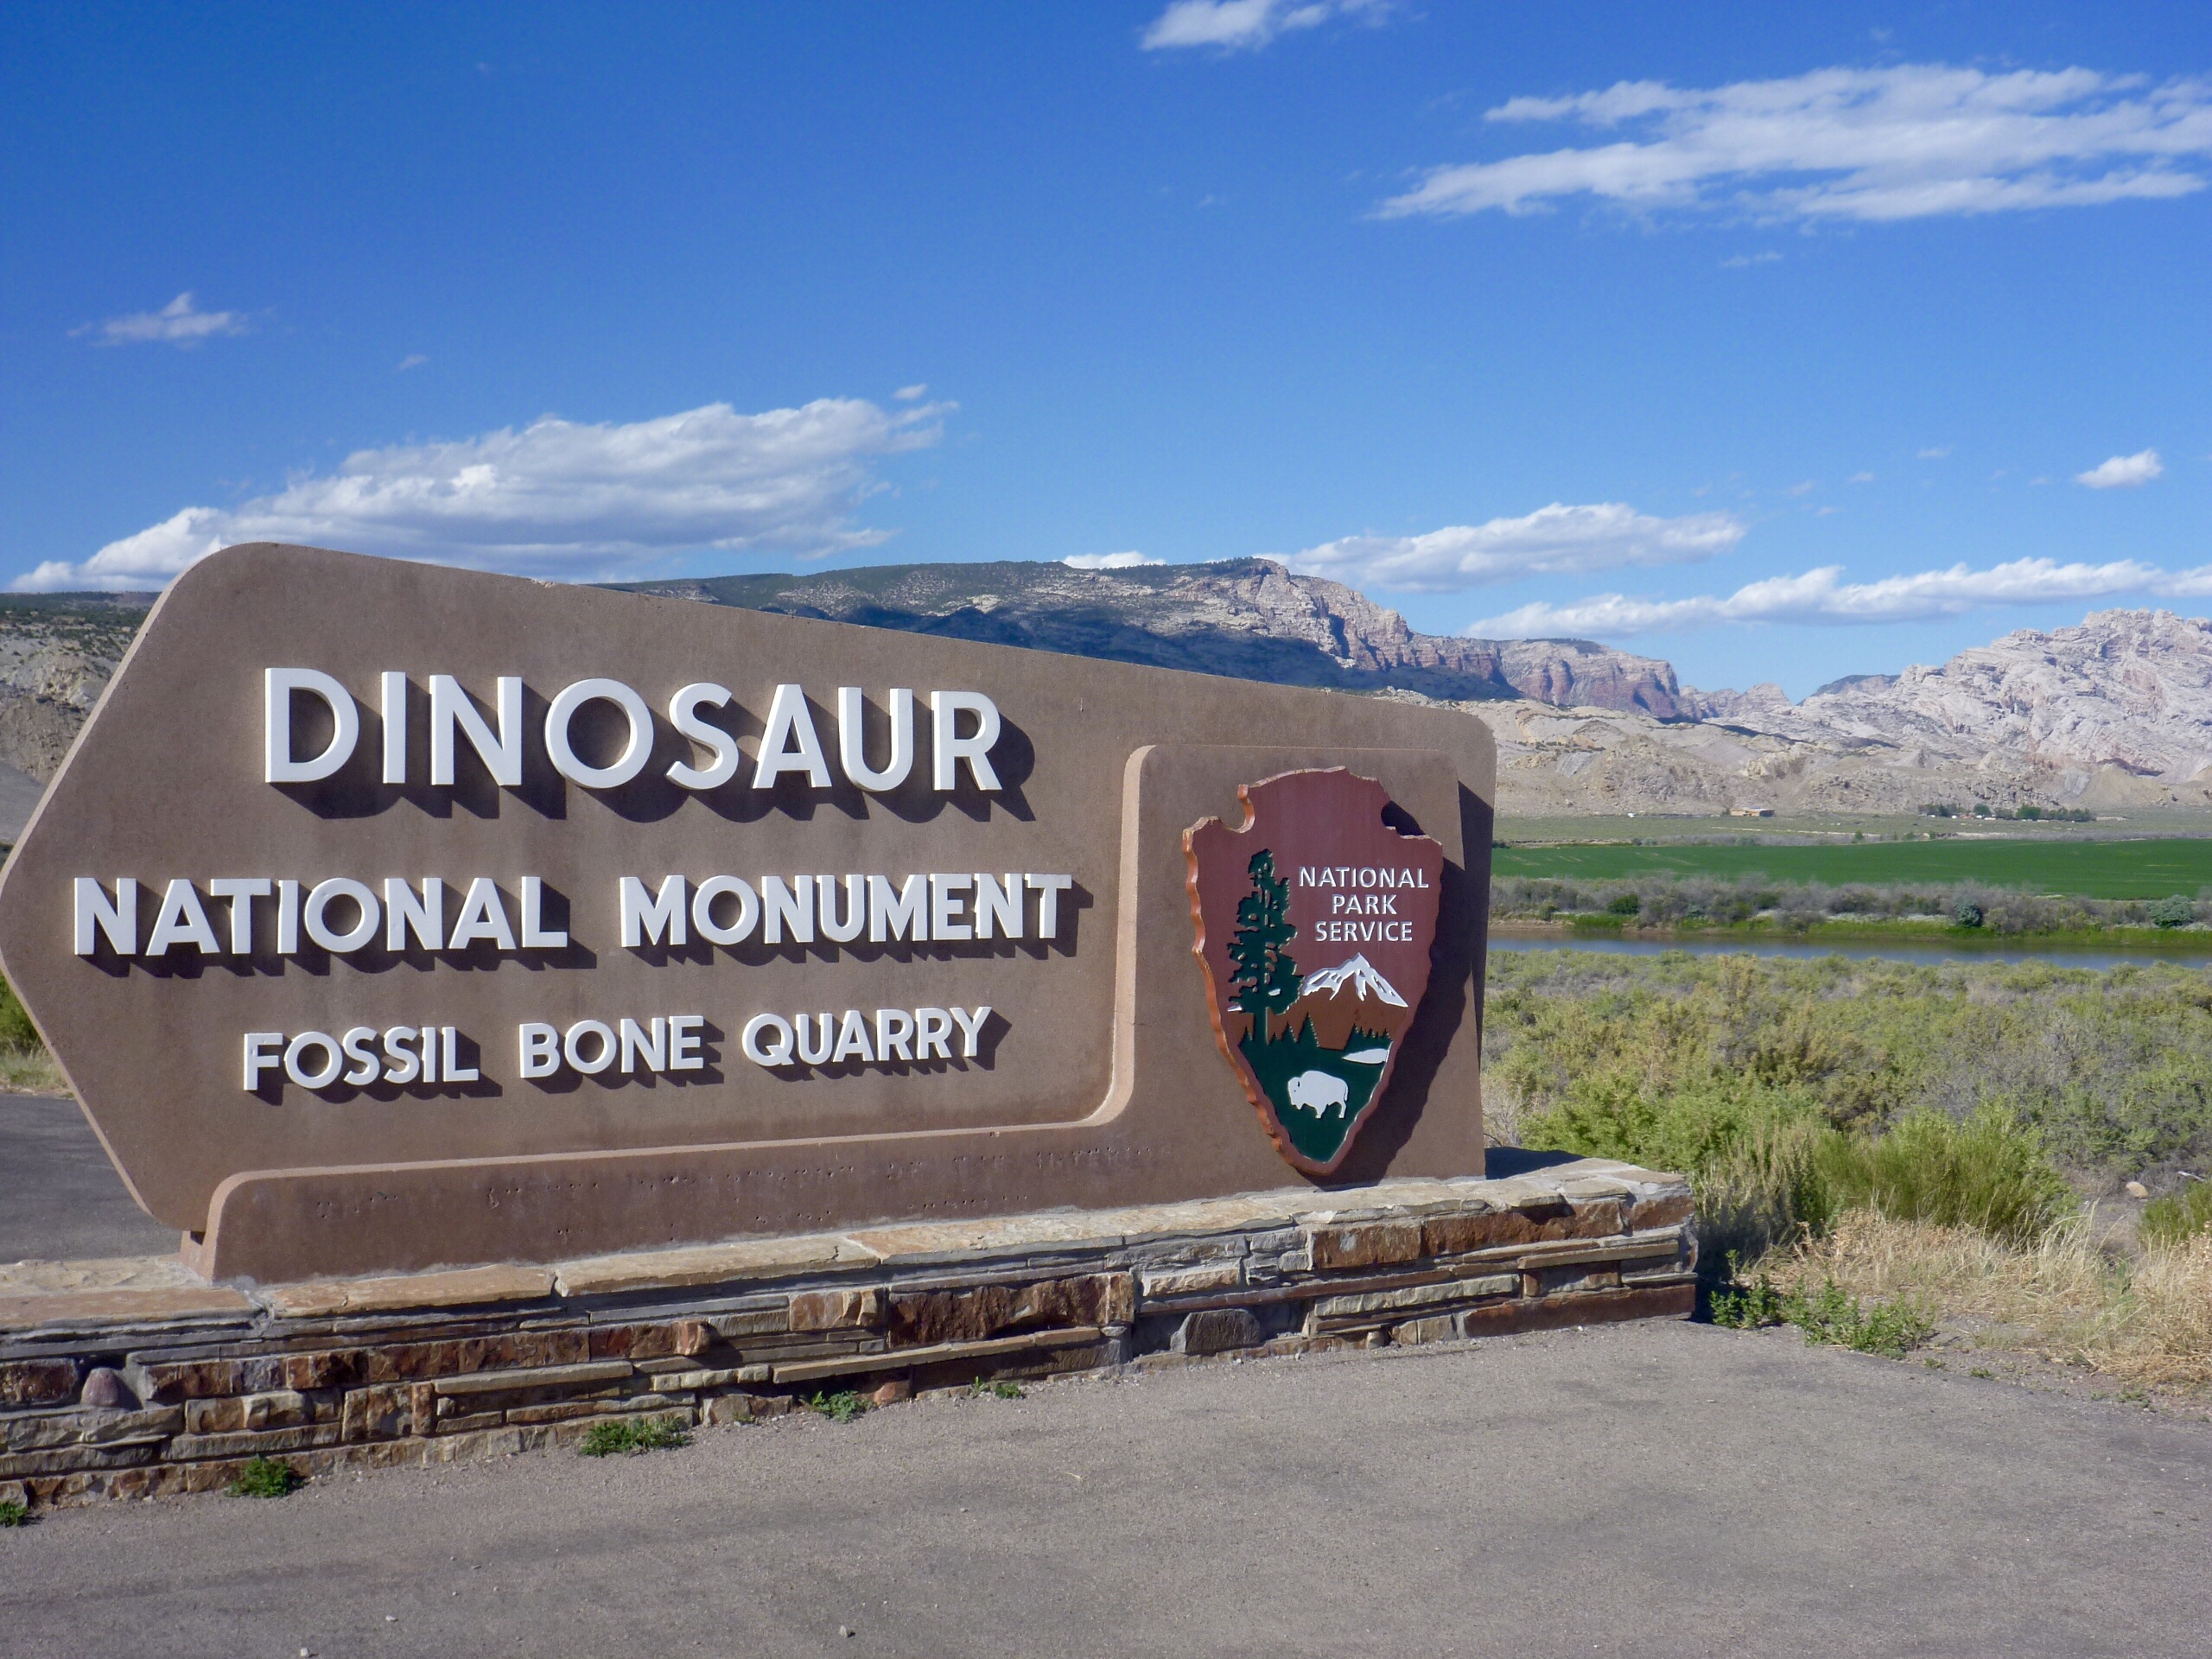 where is the dinosaur national monument